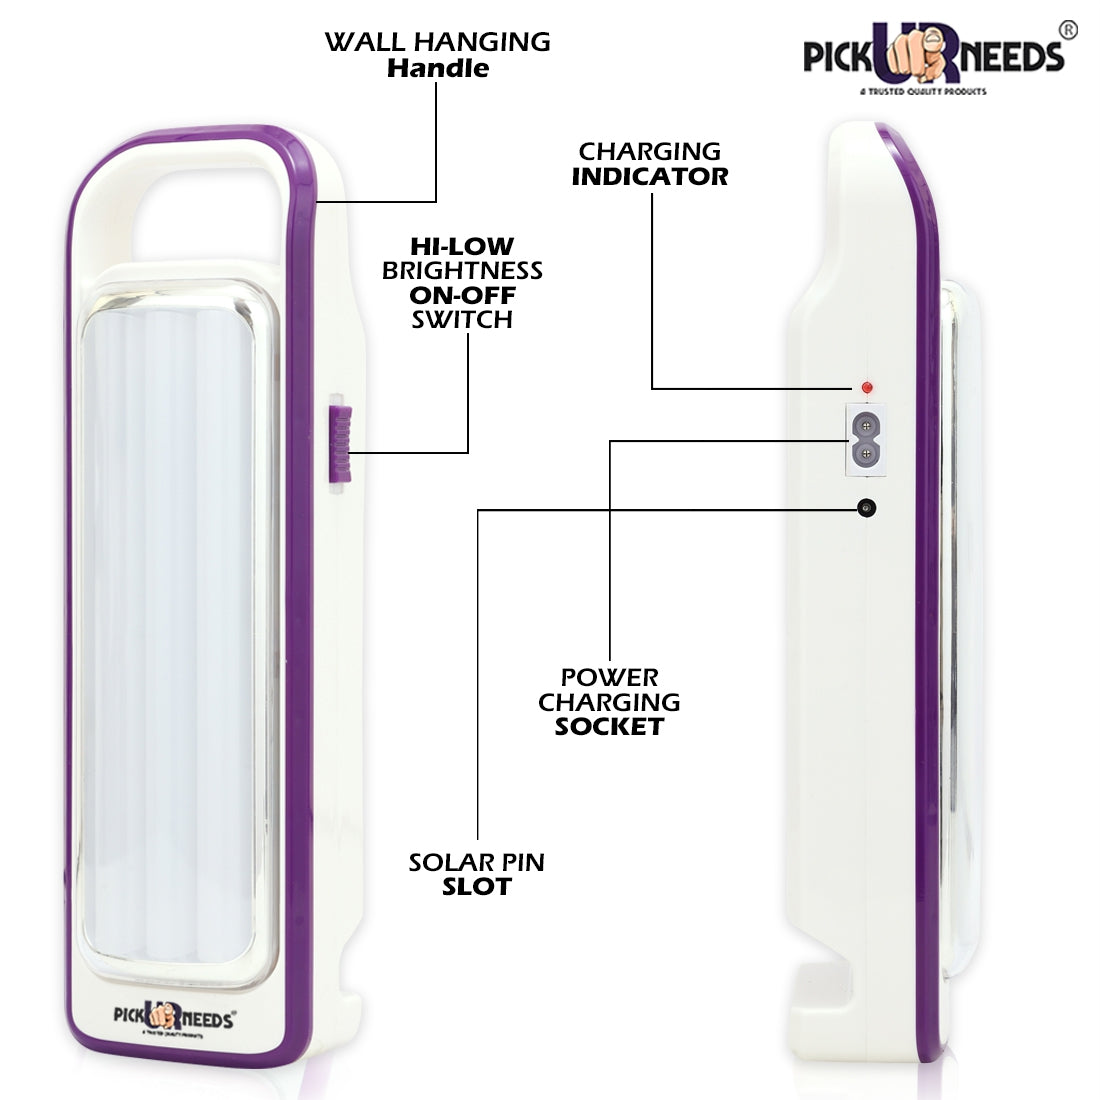 Pick Ur Needs Rechargeable Lantern Home Emergency Light with 3 LED Tube Bulbs, Portable Lamp with Hanging Stand